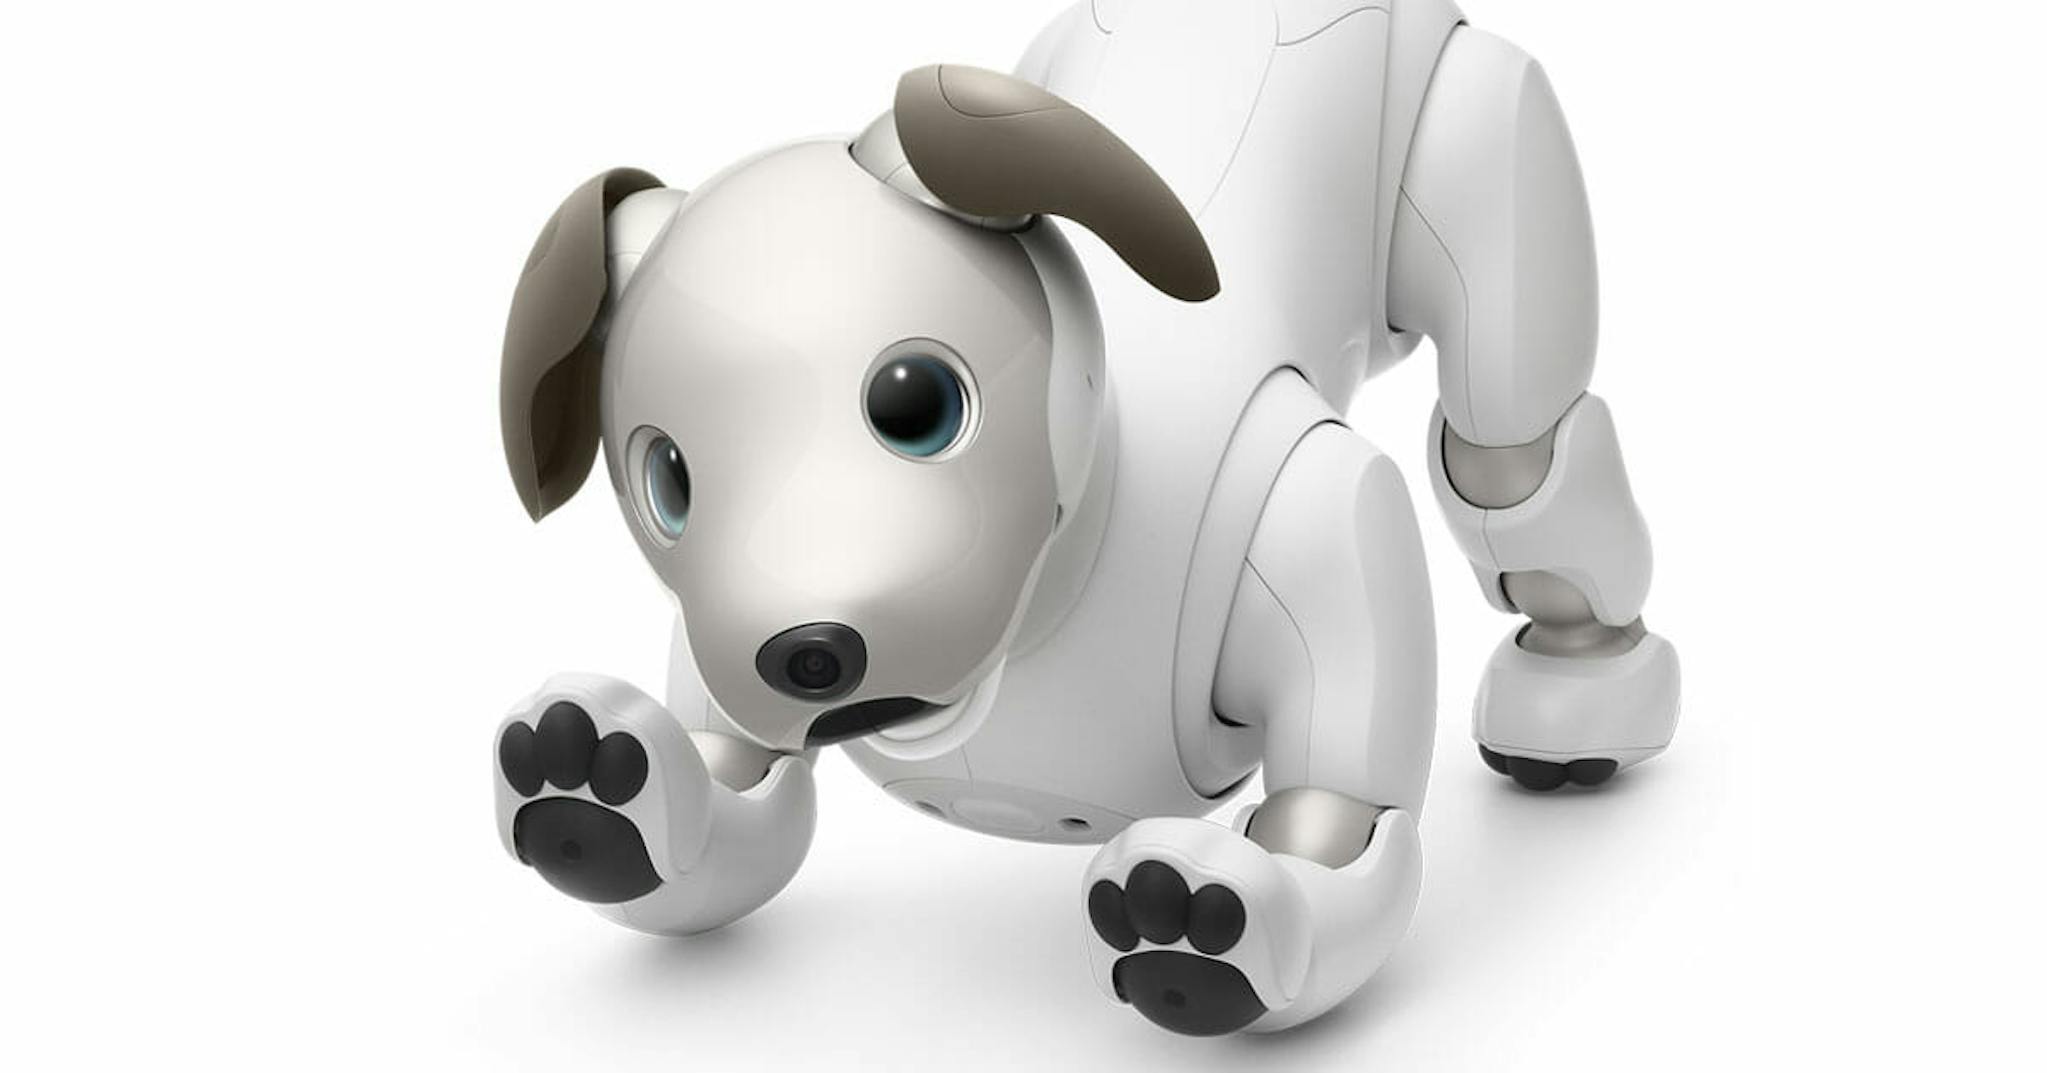 Aibo, the World's Cutest Robotic Dog by Sony, Makes U.S. Debut at 2,899